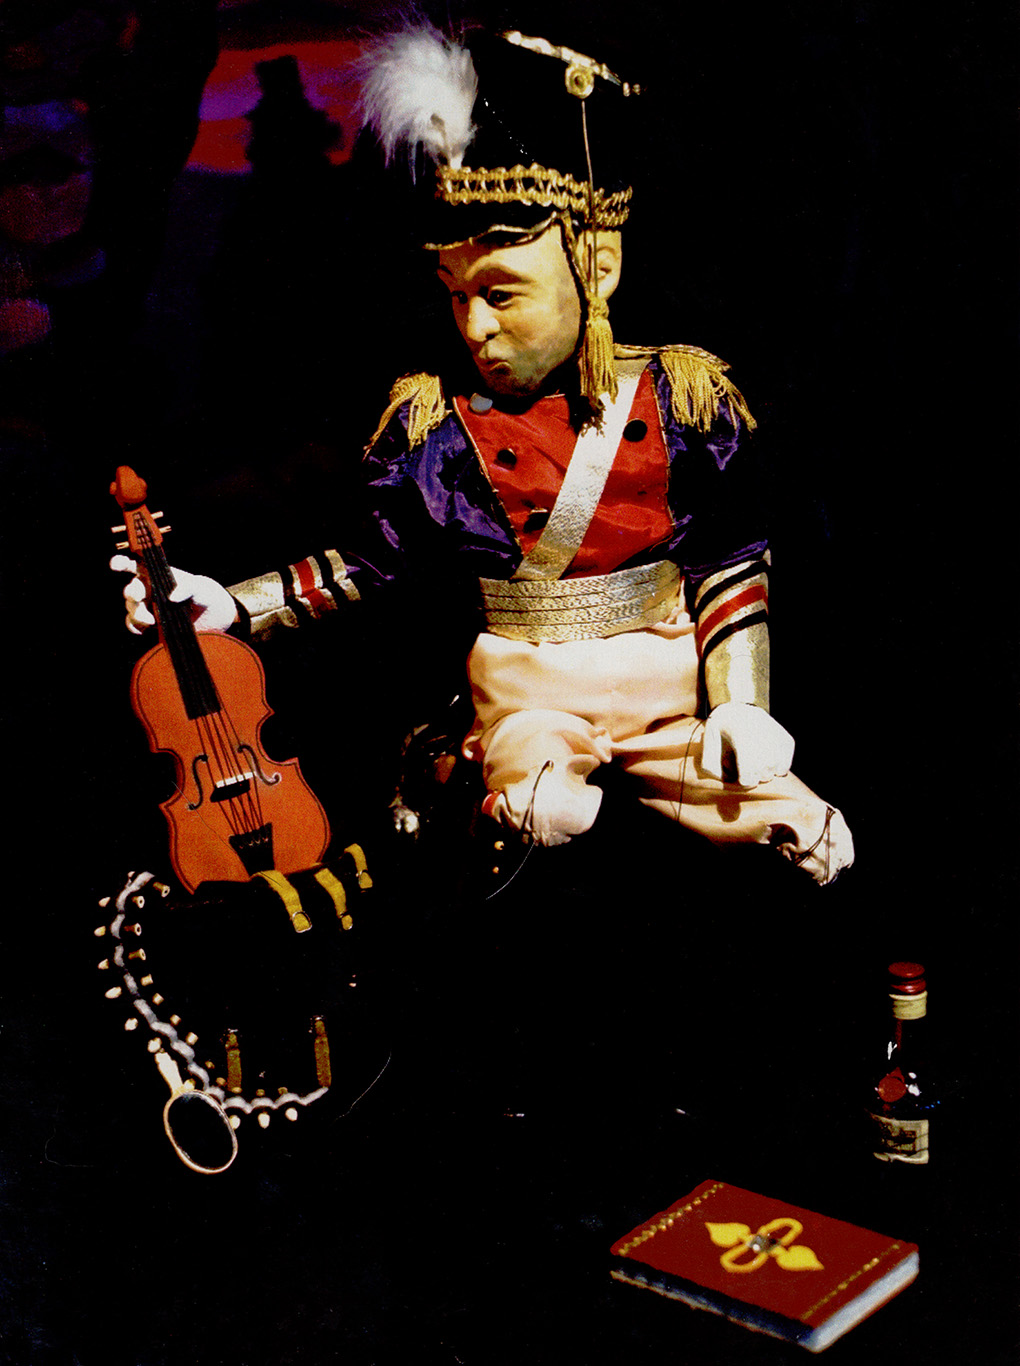 Image of soldier marionette puppet